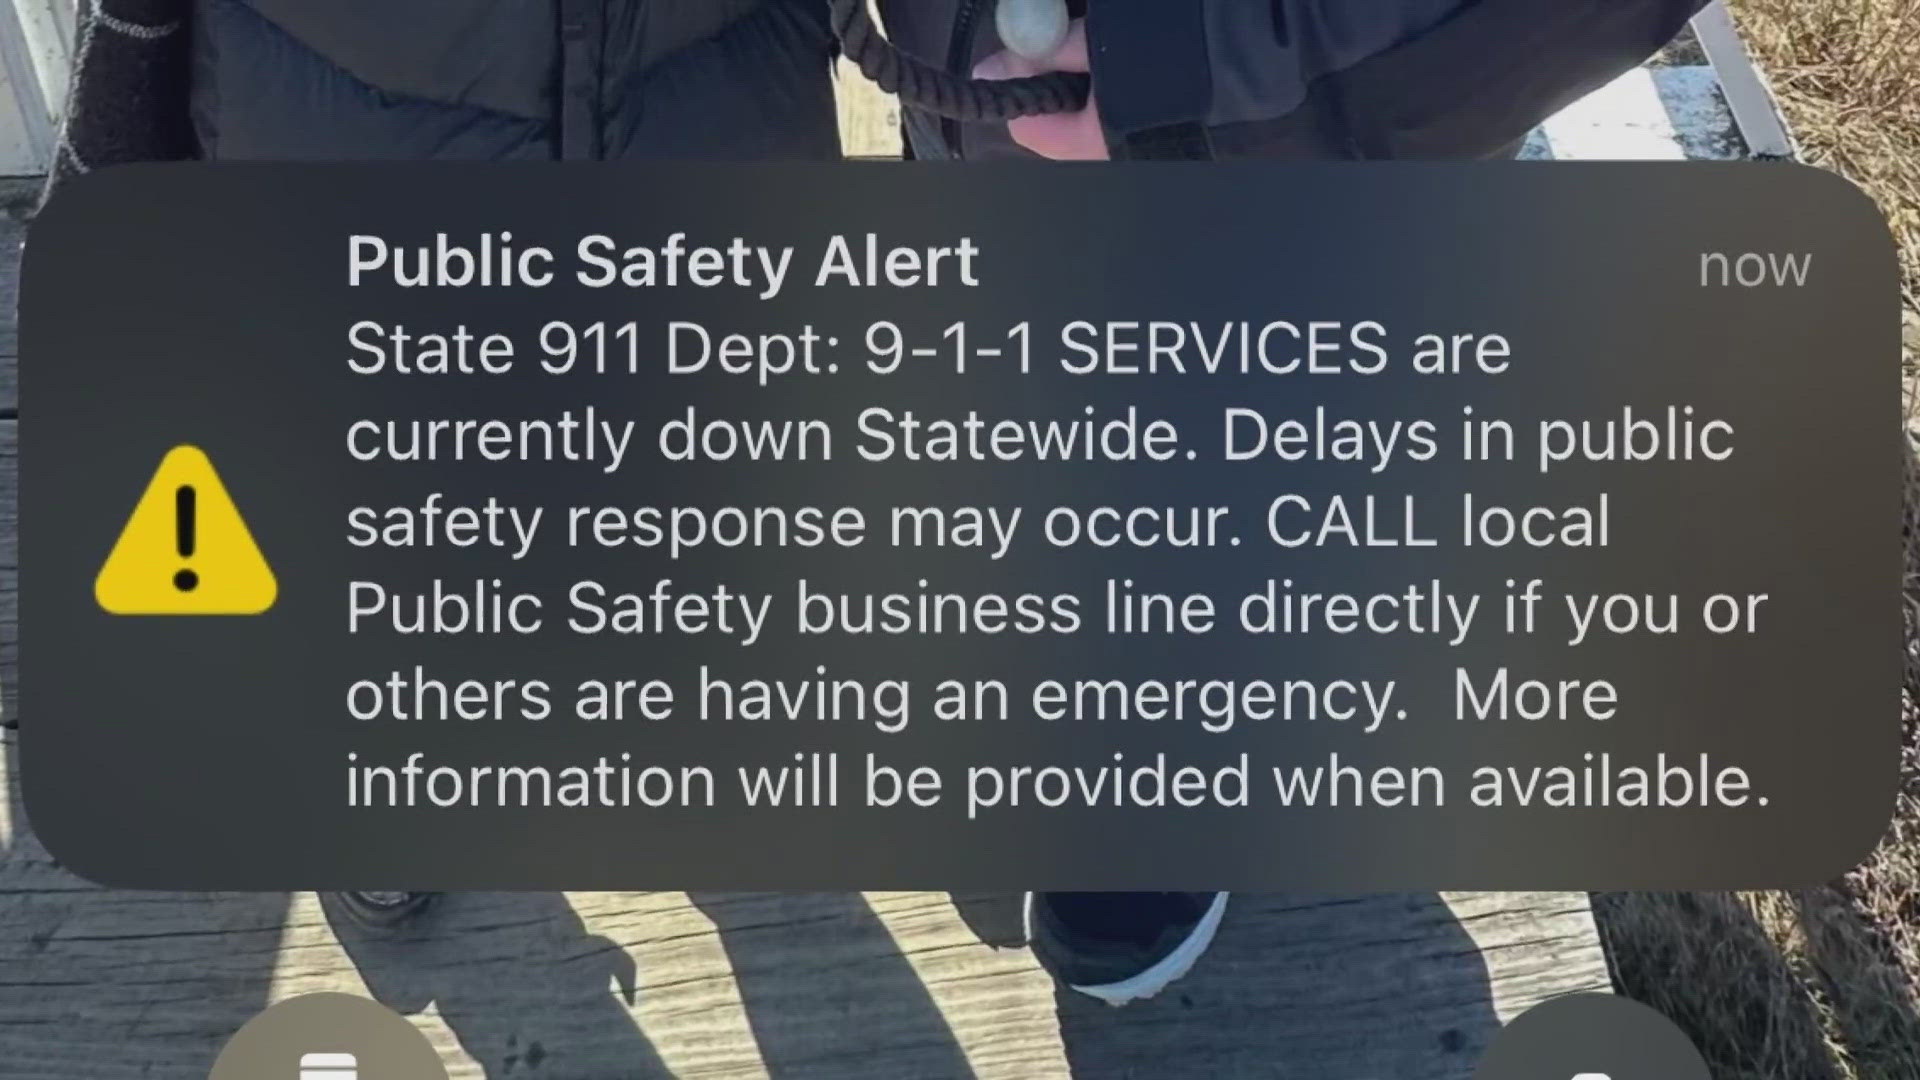 A firewall designed to prevent cyberattacks and hacking was to blame for the 911 outage that hit Massachusetts this week, state officials said.